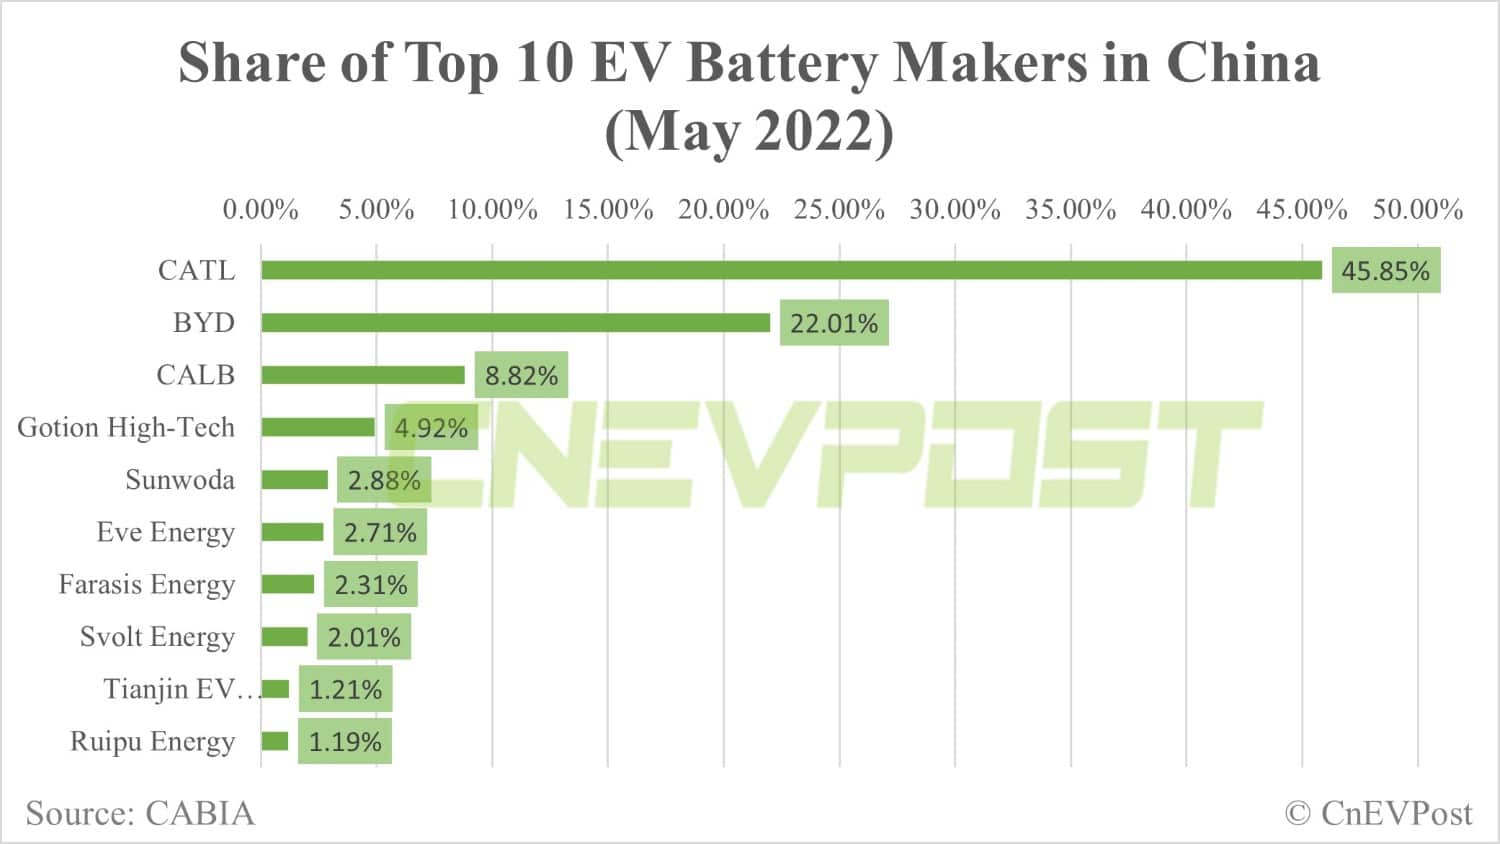 CATL's share in China's power battery market rebounds in May while BYD declines-CnEVPost